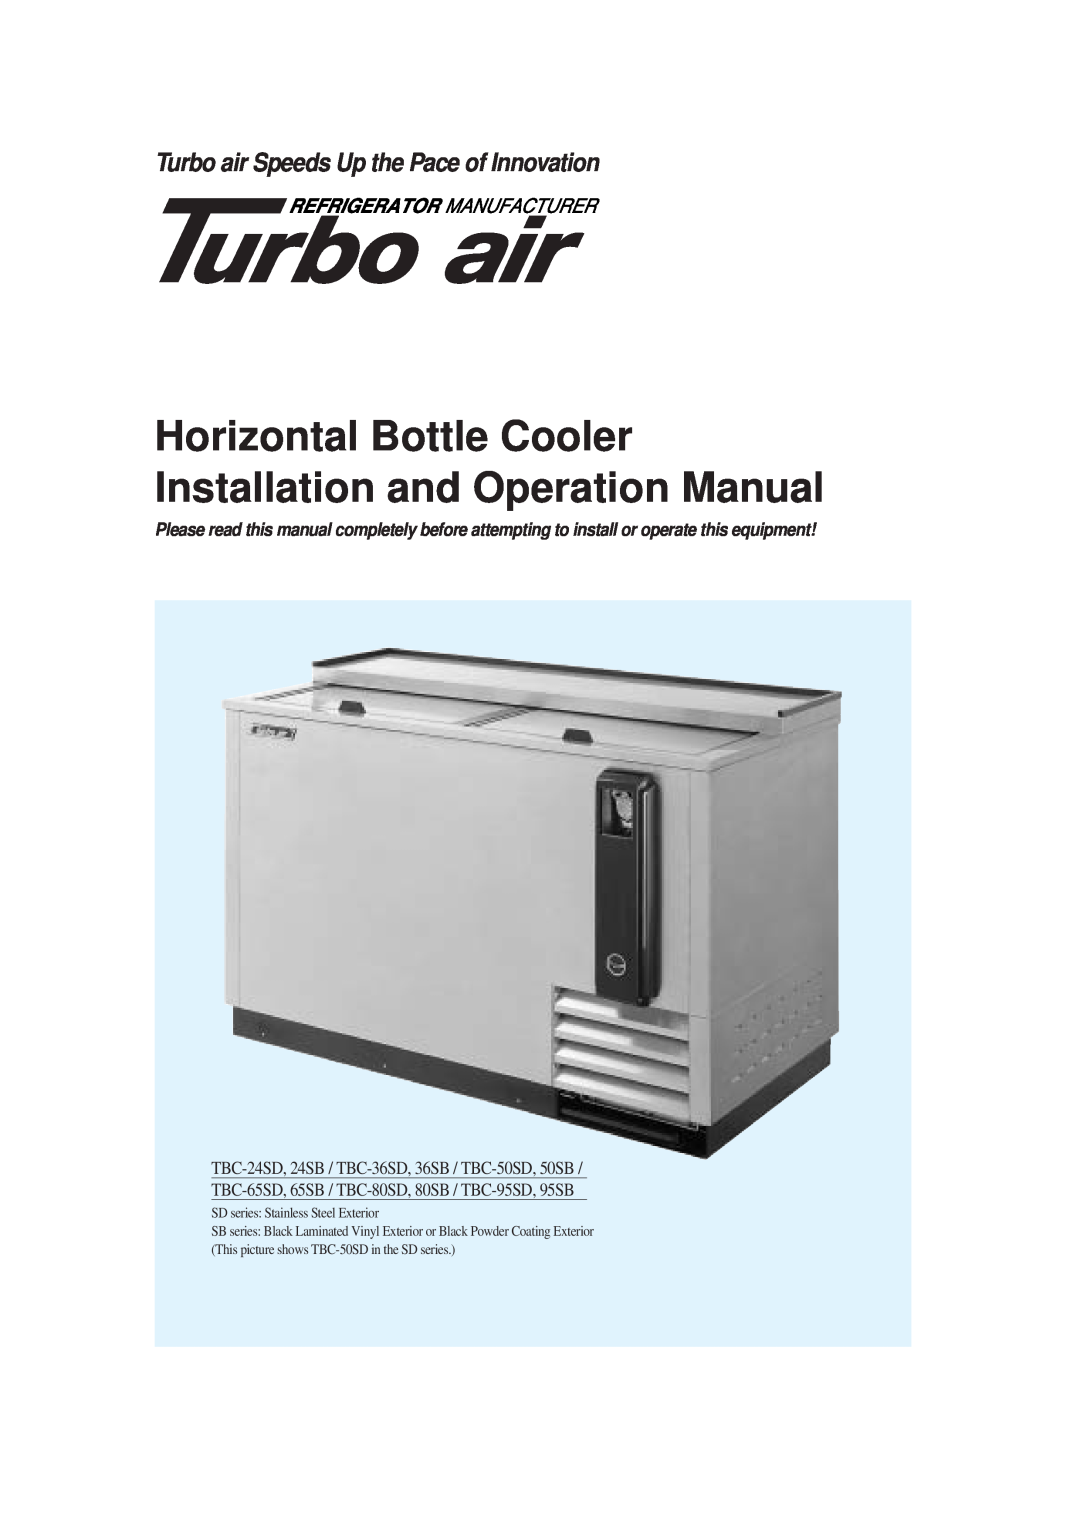 Turbo Air TBC-50SD, 50SB operation manual Turbo air Speeds Up the Pace of Innovation, SD series Stainless Steel Exterior 